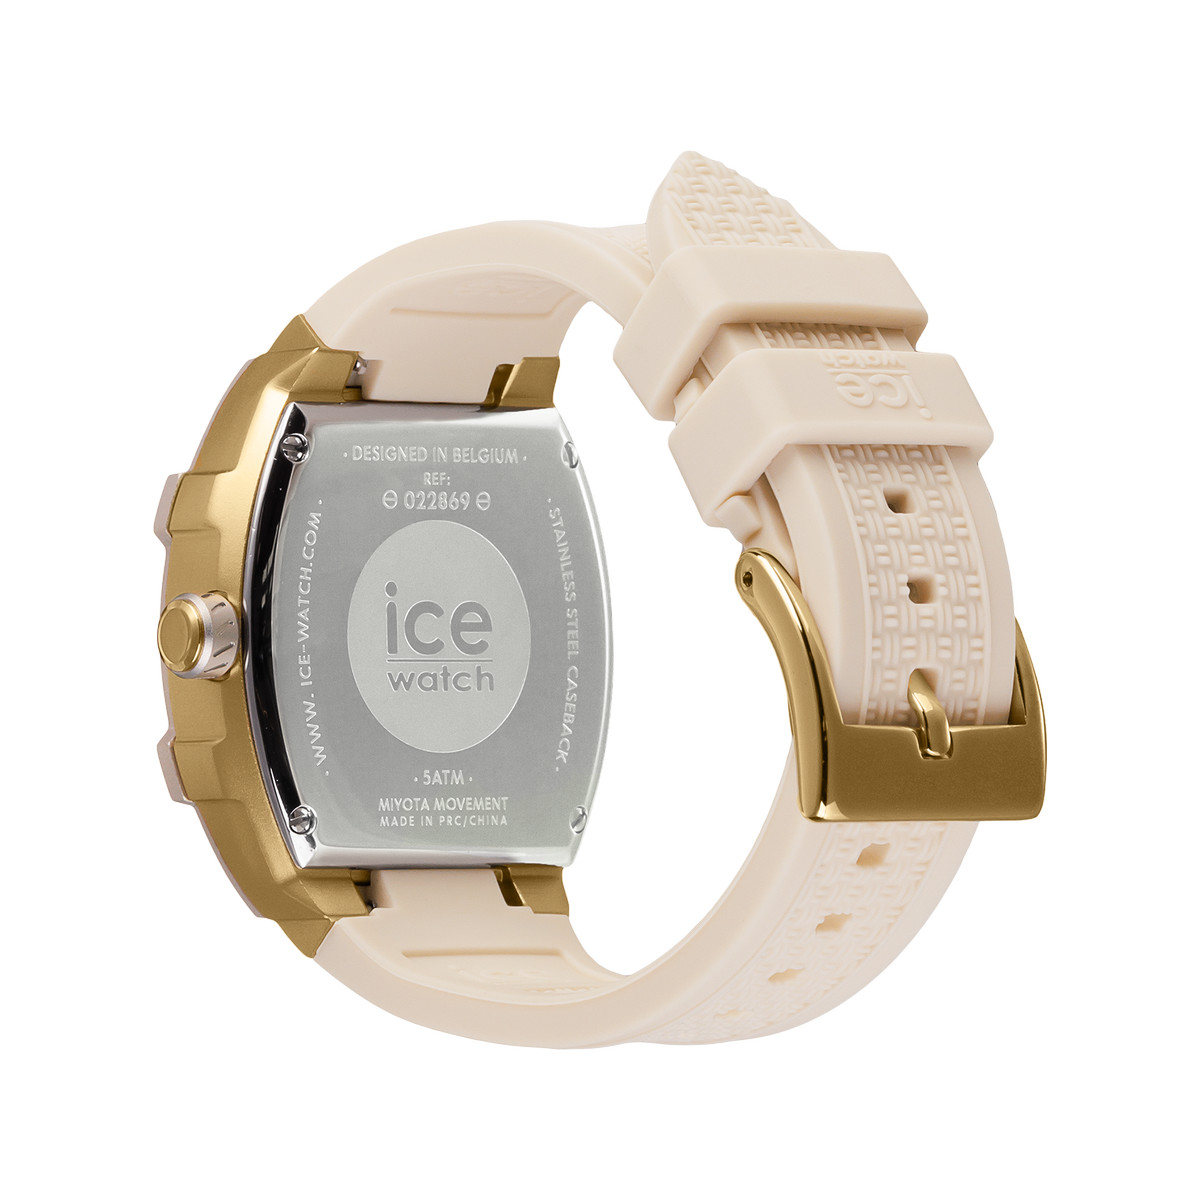 Montre ICE WATCH Ice boliday femme bracelet silicone beige - vue 3